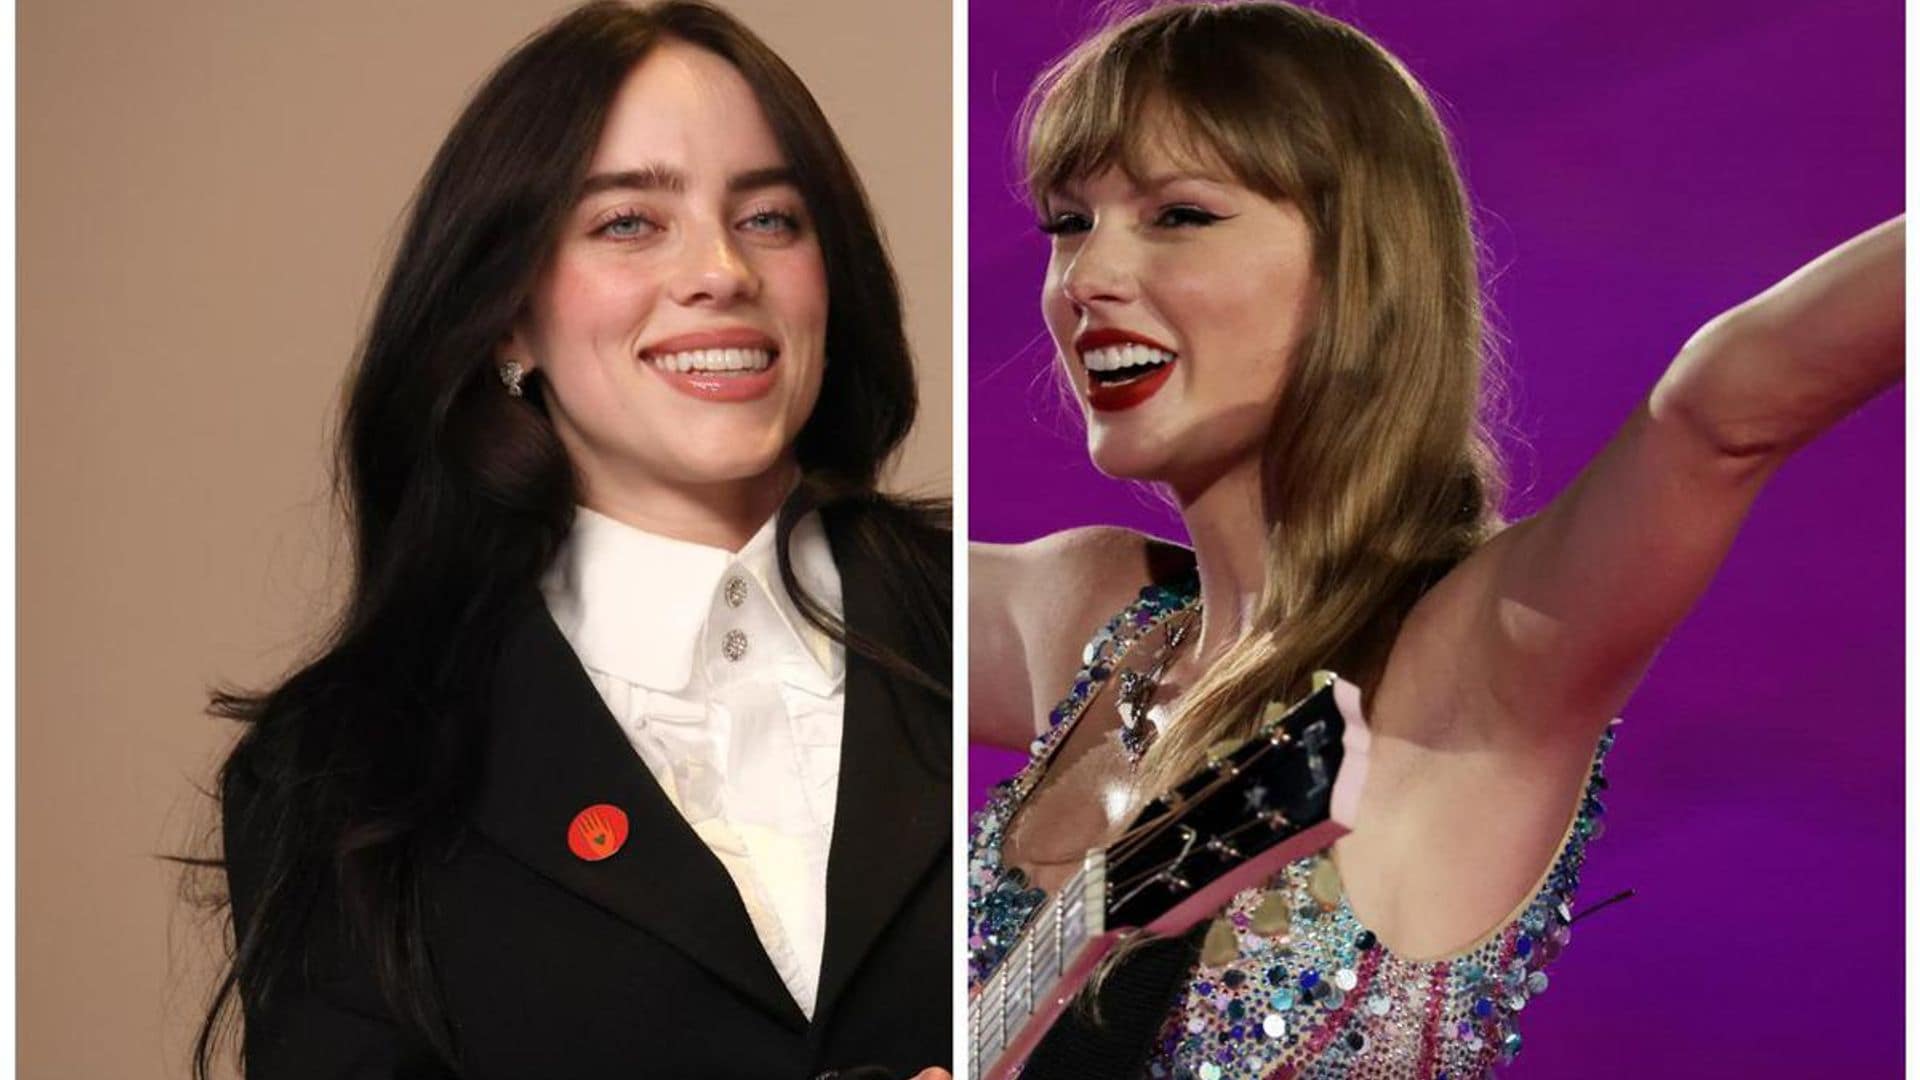 Billie Eilish denies rumored feud with Taylor Swift after comments about the music industry